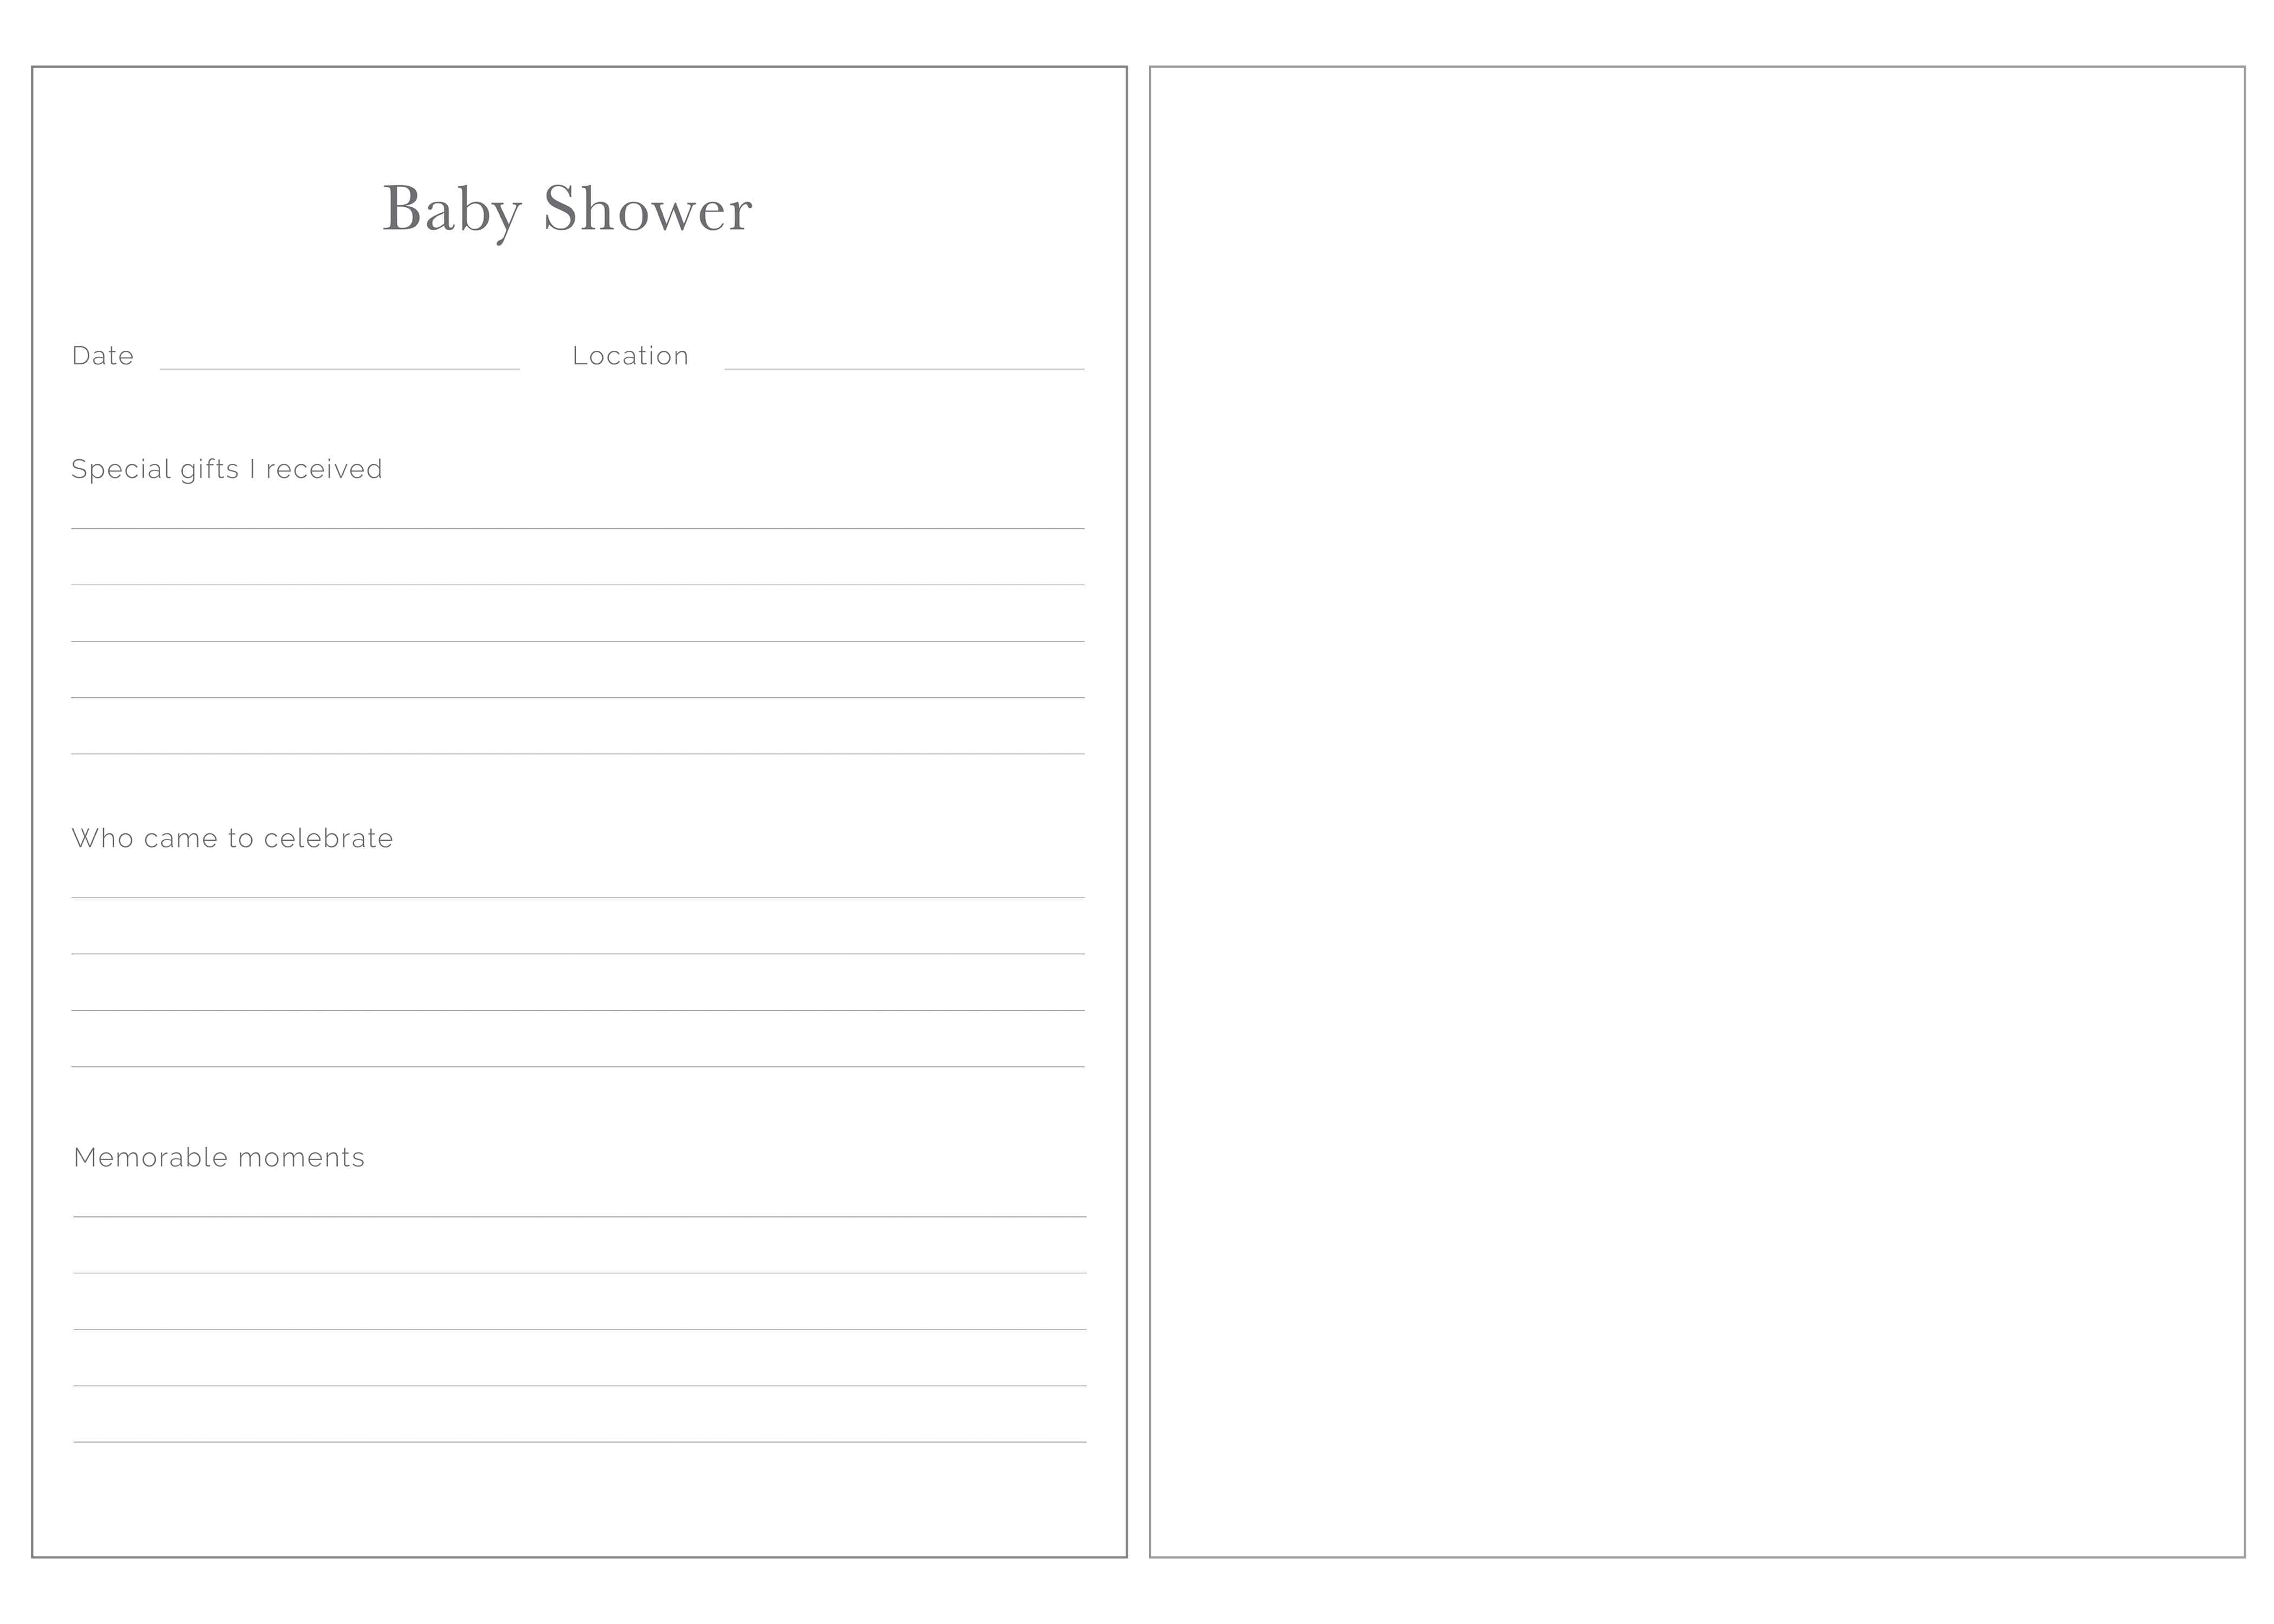 Baby Shower Page